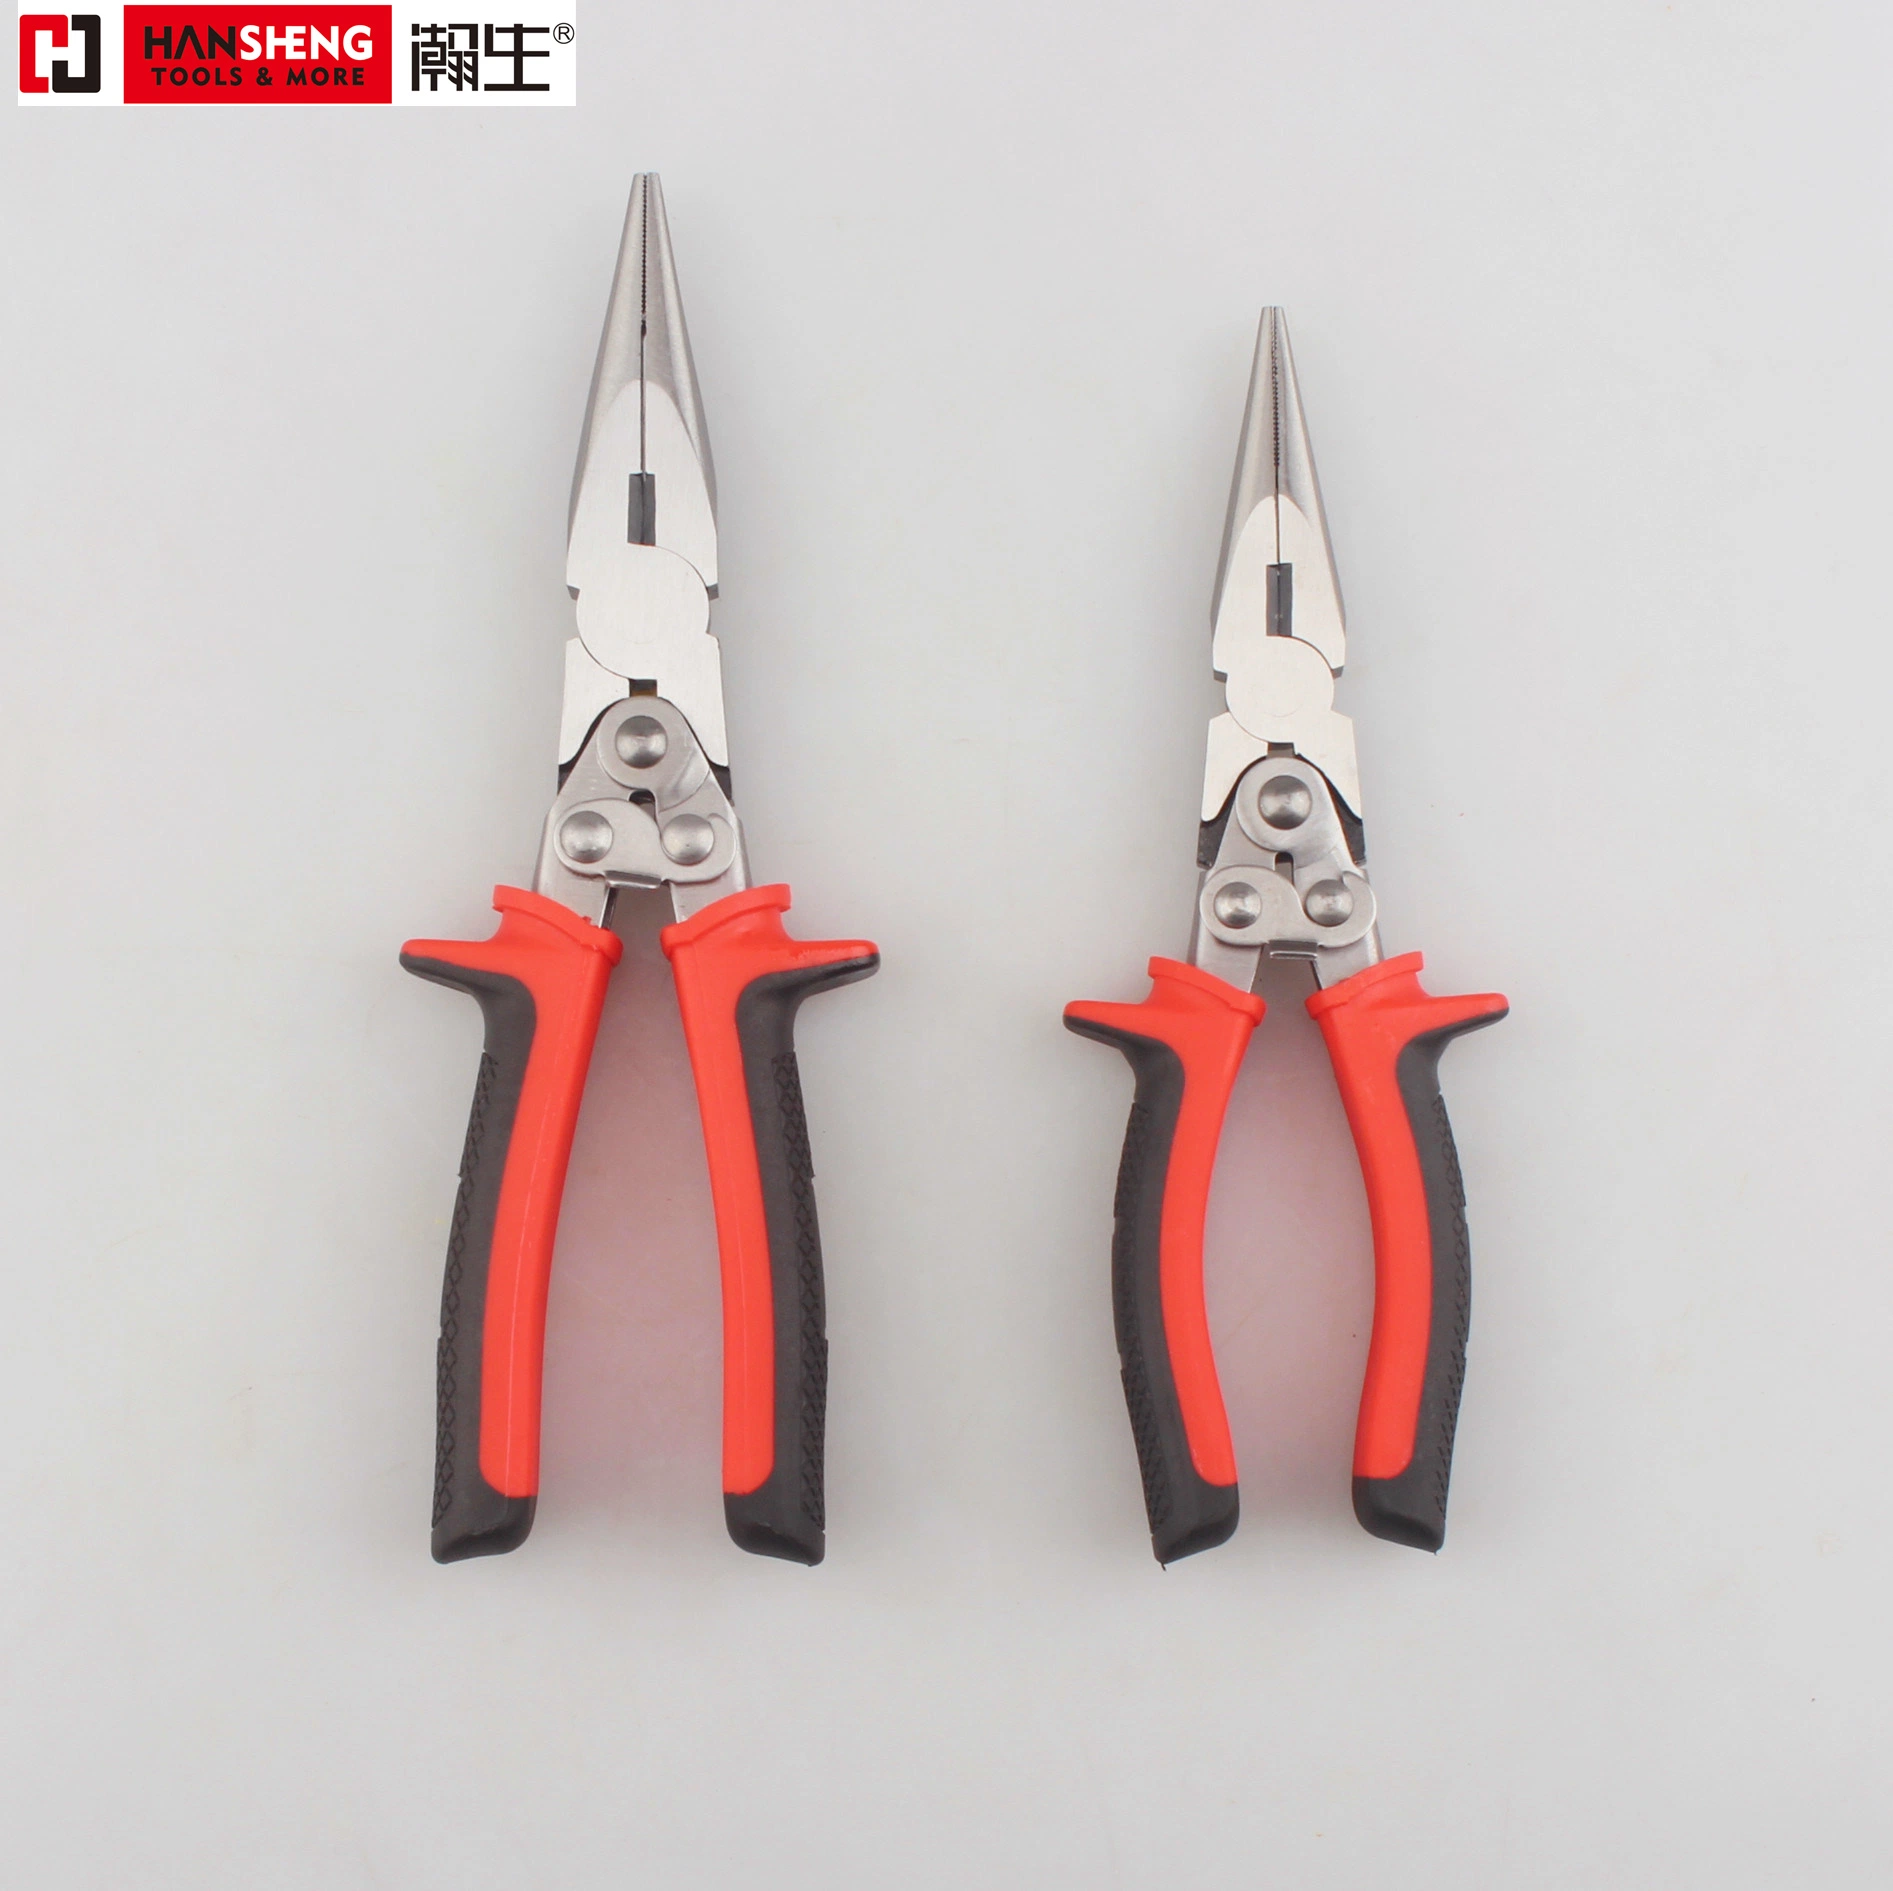 6", "Double Joint Wire Pliers, Made of Cr-V, Polish, TPR Handles, Compound Labor-Saving Pliers, Compound Long Nose Pliers, Compound End Cutter Plier